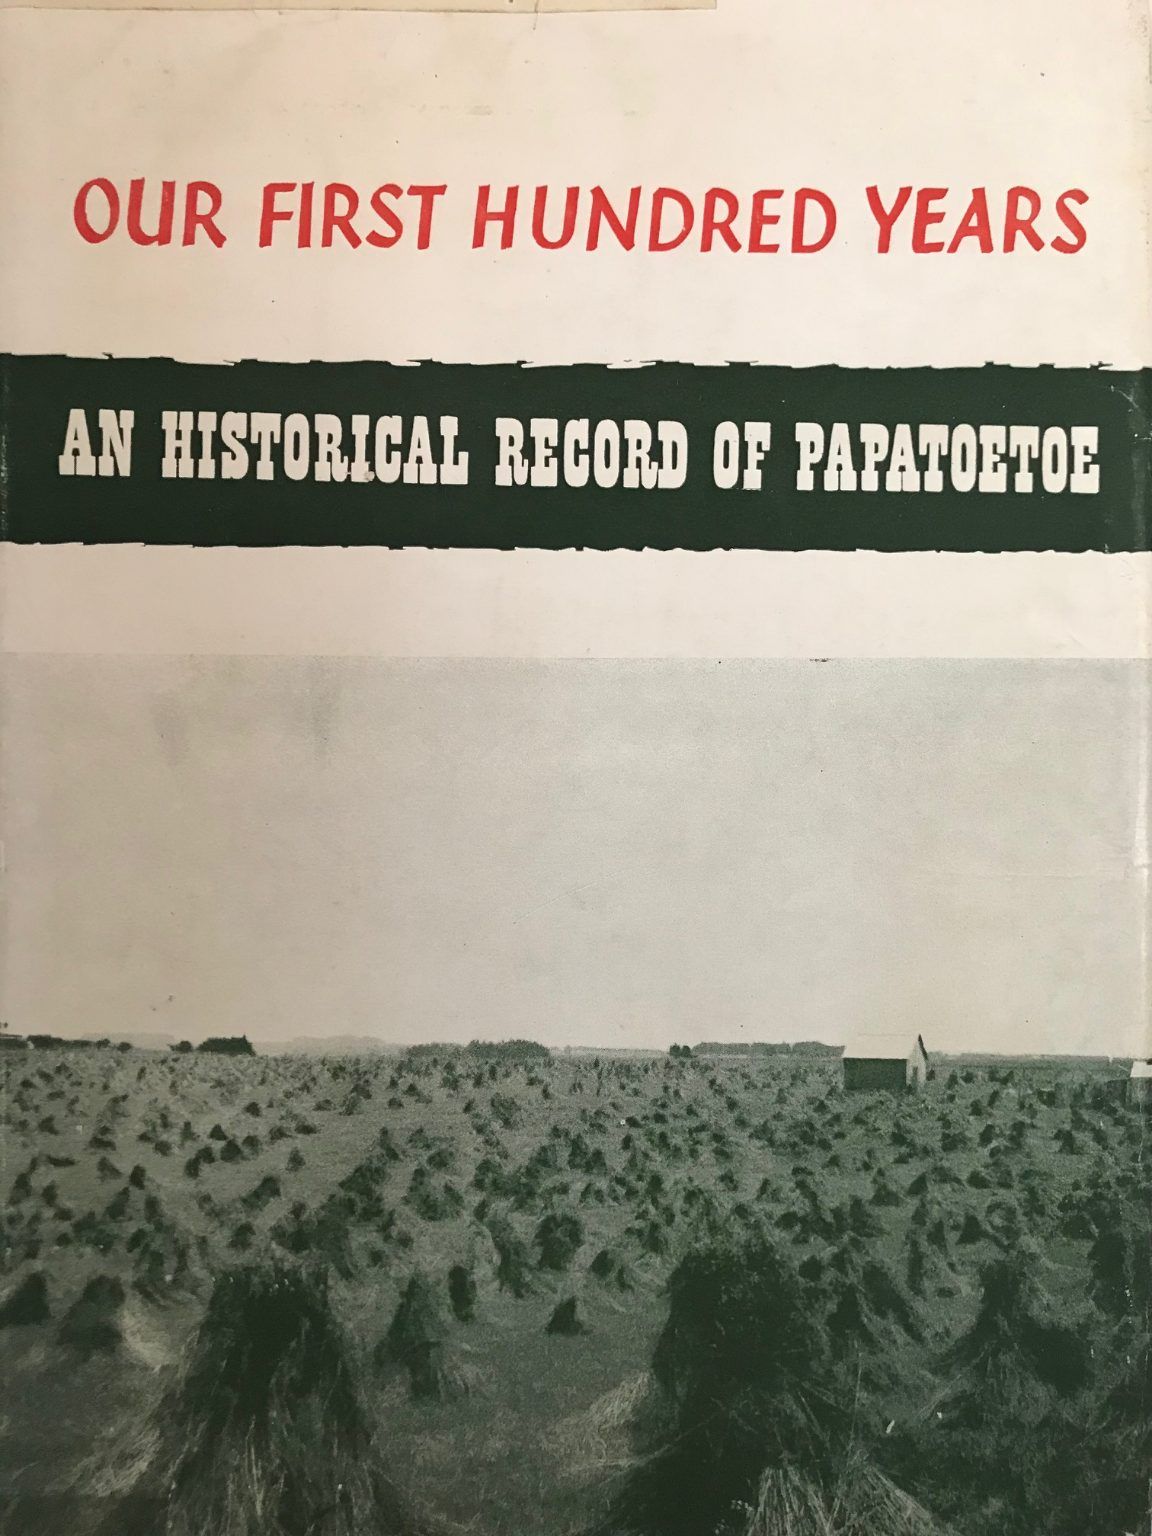 OUR FIRST HUNDRED YEARS: An Historical Record of Papatoetoe